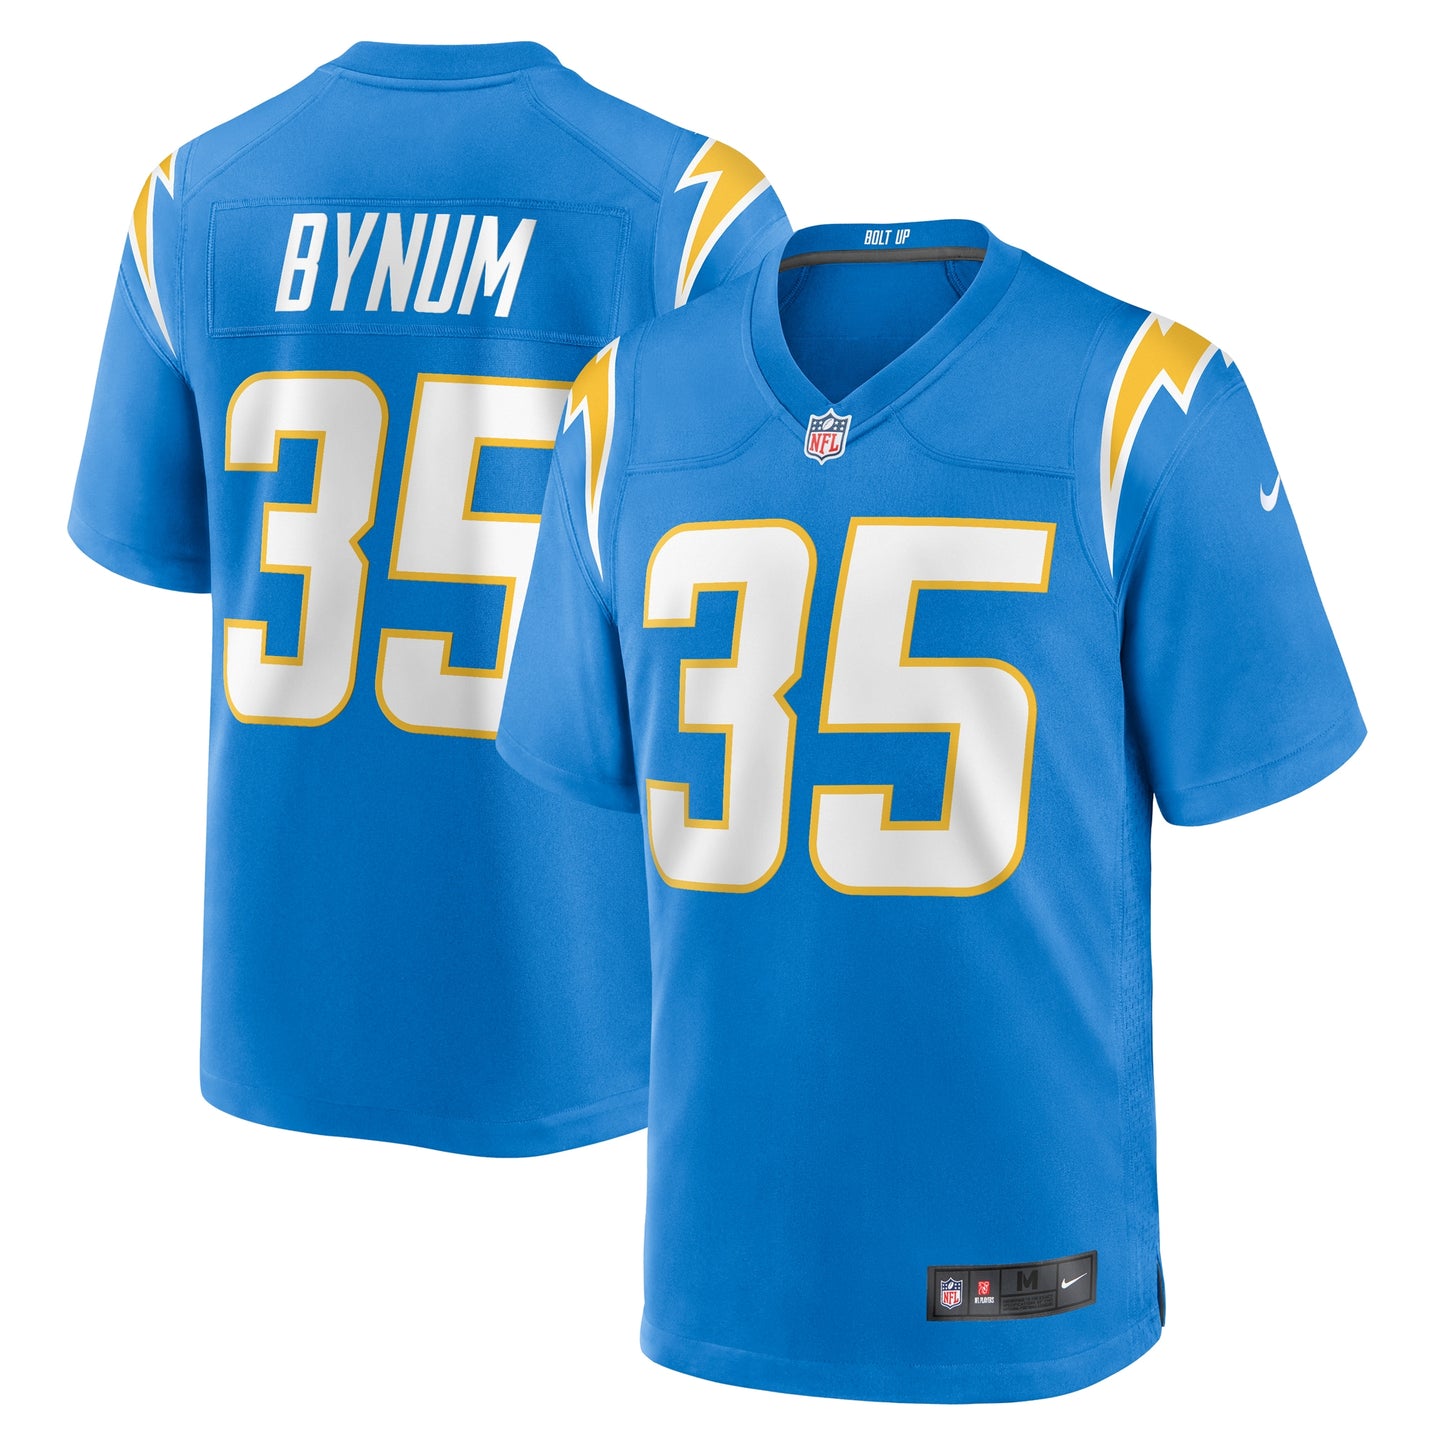 Terrell Bynum Los Angeles Chargers Nike Team Game Jersey -  Powder Blue